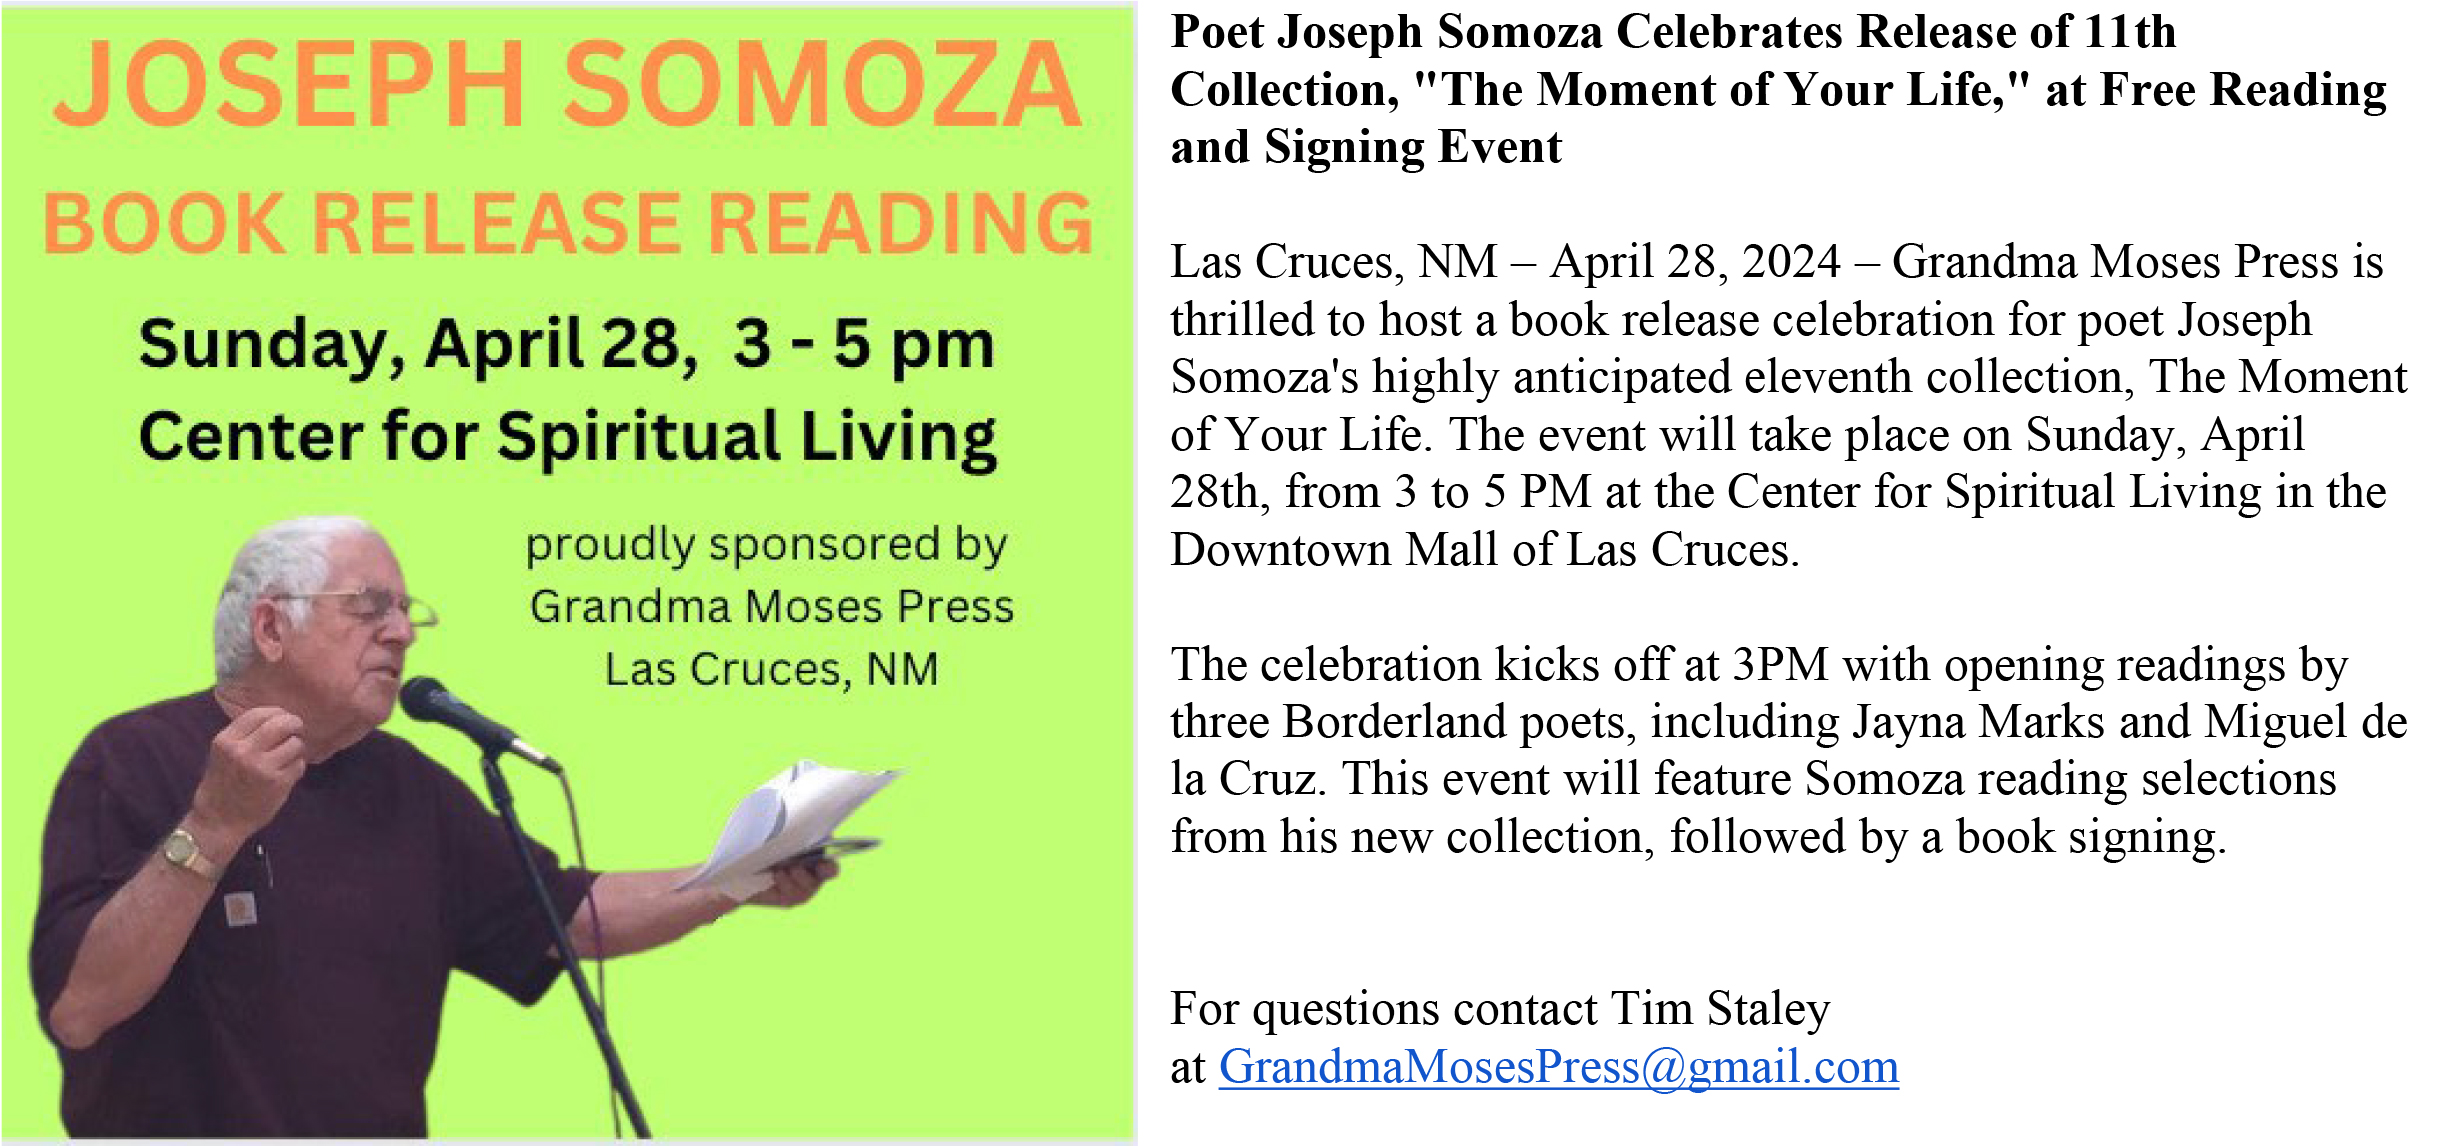 Poet-Joseph-Somoza-Celebrates-Release-of-11th-Collection-half-page-flyer